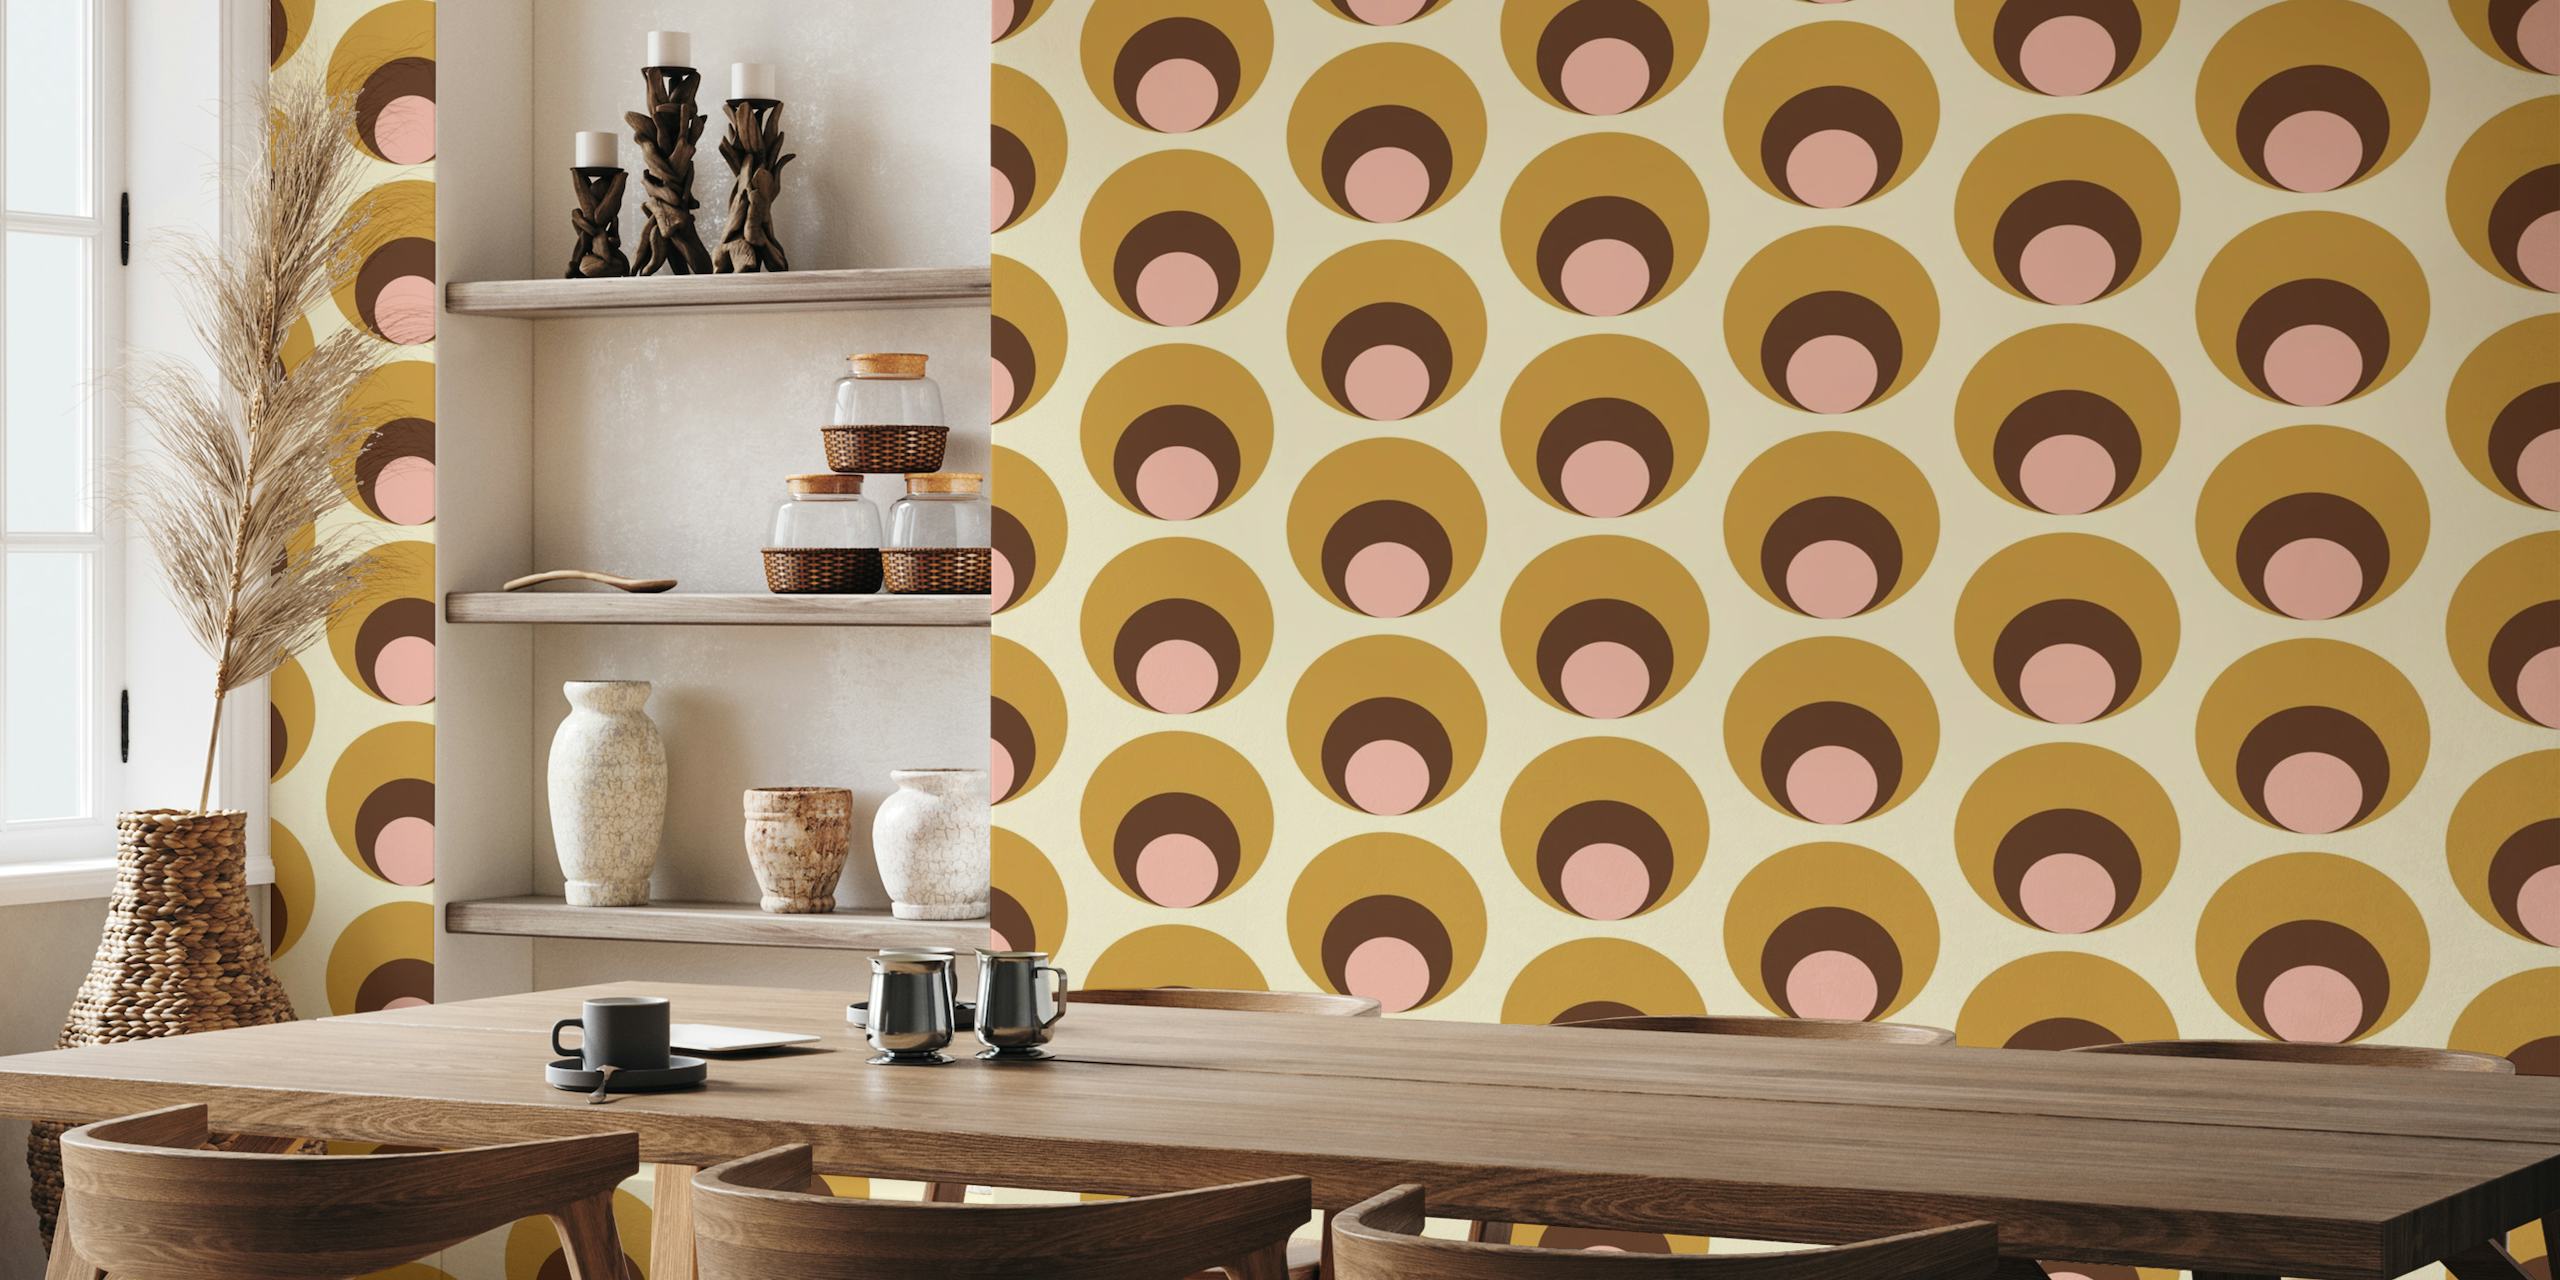 Apricity Retro Dots Beige Wall Mural featuring overlapping circles in beige, taupe, and blush tones.